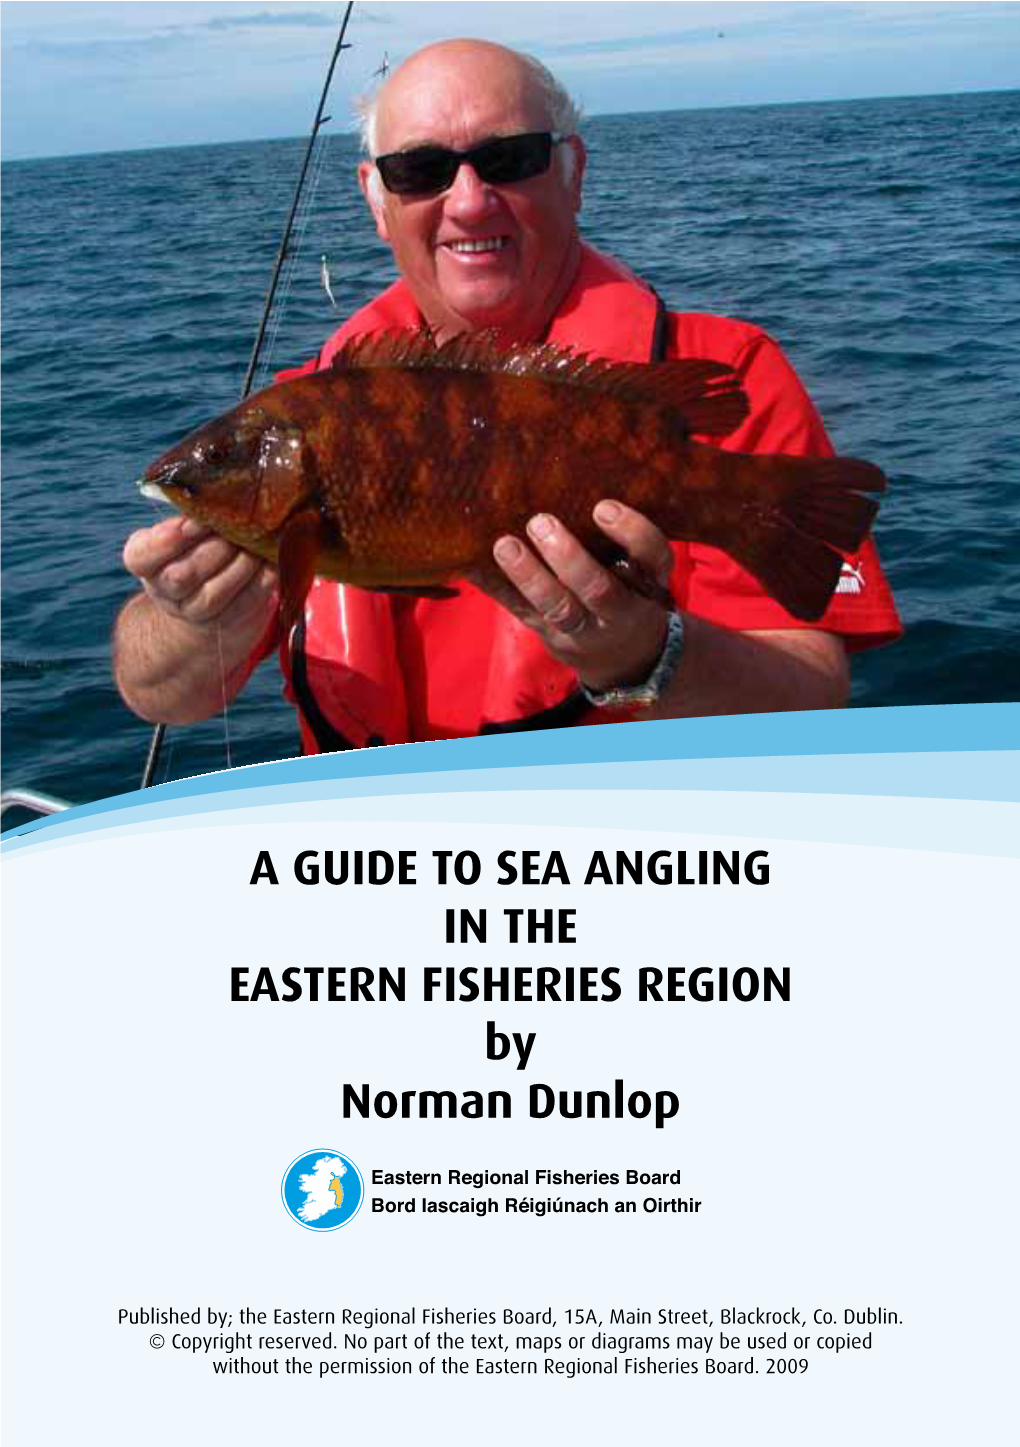 A GUIDE to SEA ANGLING in the EASTERN FISHERIES REGION by Norman Dunlop